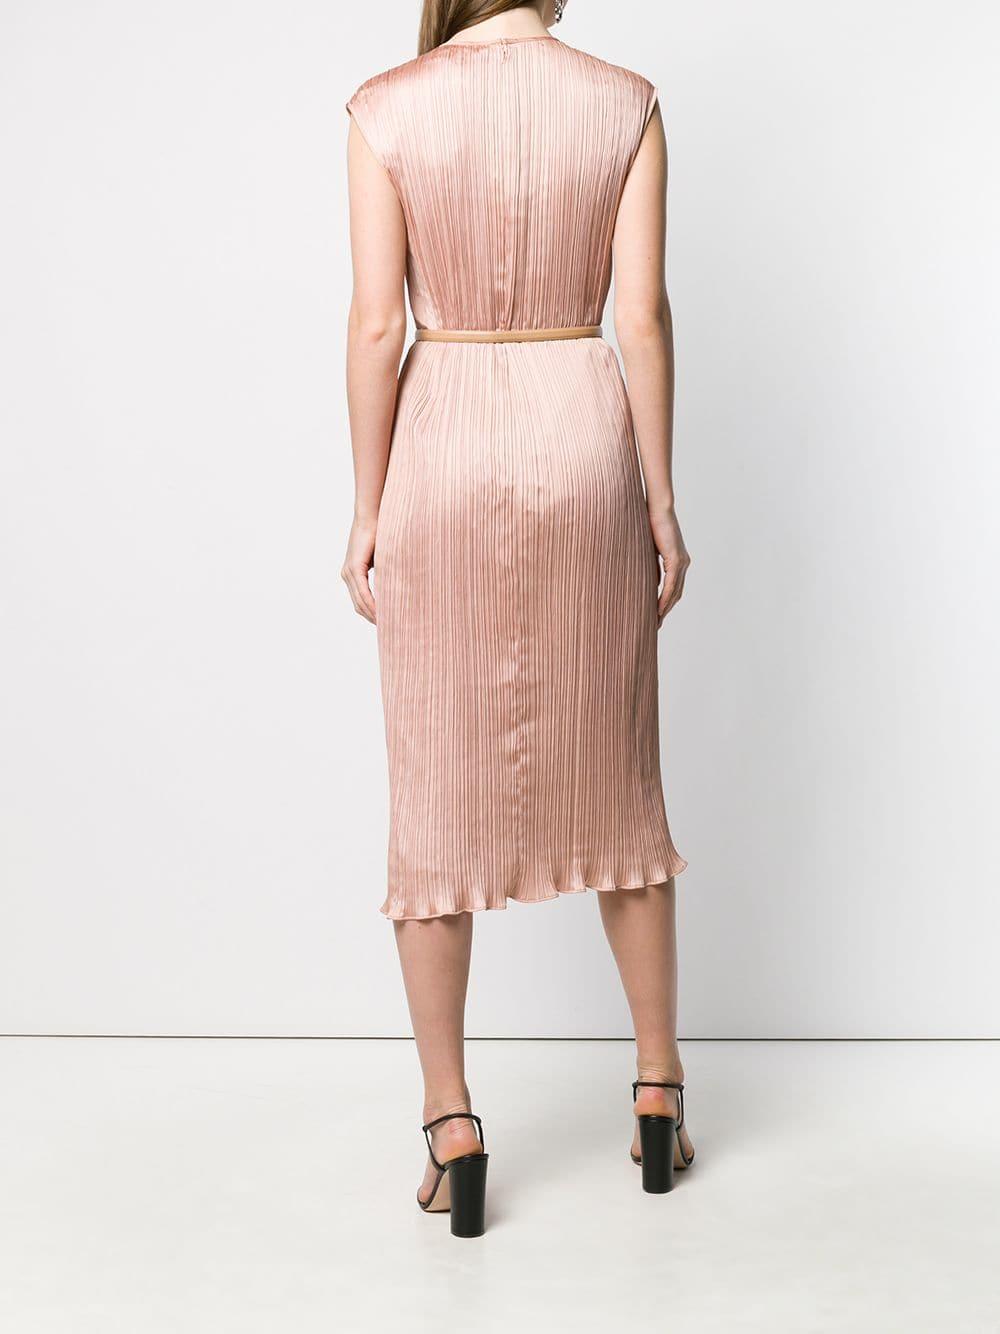 Max Mara Synthetic Gineceo Pleated Midi Dress in Pink - Lyst